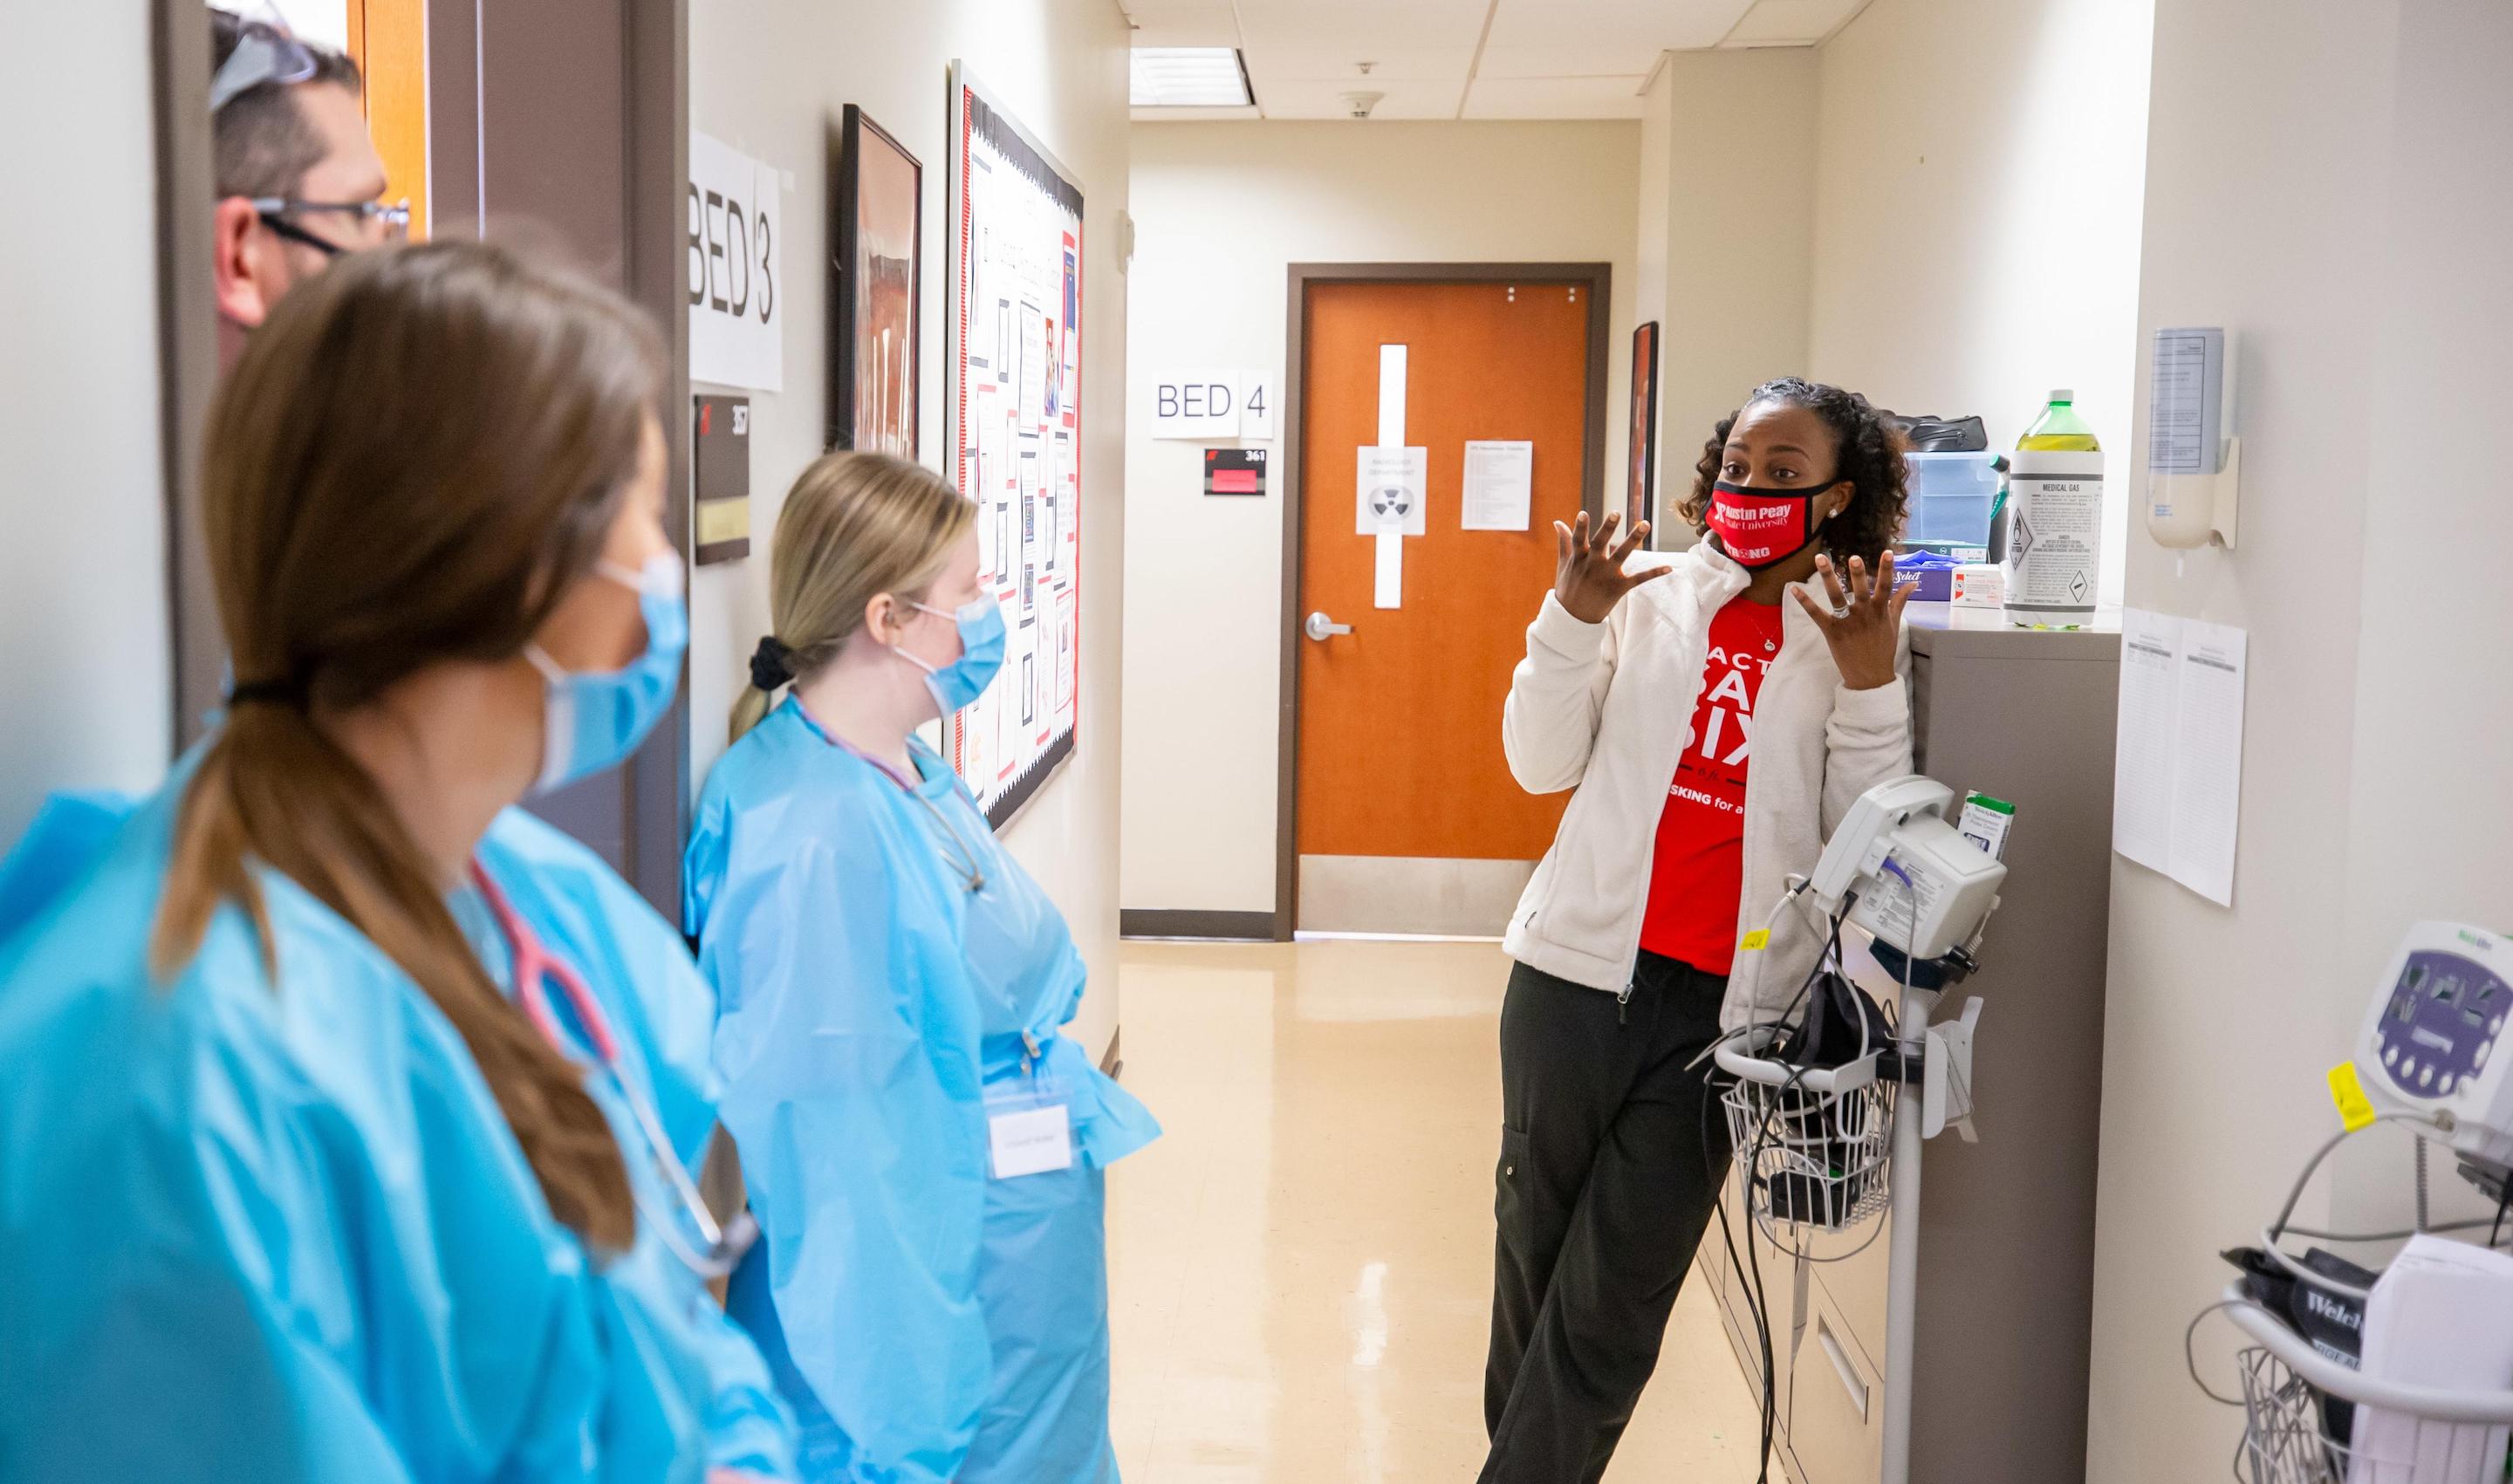 Earlier this month, about 70 Austin Peay State University nursing and radiologic technology students navigated a two-day interdisciplinary simulation where they learned the real-life stakes of collaboration and communication.  The exercise was the first of its kind at Austin Peay, an APSU School of Nursing simulation that brought students from another college – the College of Science, Technology, Engineering and Mathematics – to the school’s simulation lab.  APSU Nursing Simulation Center’s Adrienne Wilk explained the high stakes exercise to the senior-level students before they stepped into the lab.  “Today is for us to improve patient safety and patient outcomes,” she said. “We want you to apply that discipline-specific theoretical knowledge that we’ve lectured to you over the last several months. We want you to apply that knowledge in a real-life clinical setting.”  The objectives of the simulation included understanding the roles each discipline has in a medical setting while collaborating and communicating effectively to improve patient outcomes.  “You have to learn how to communicate,” said Jennifer Thompson, program director for radiography at Austin Peay. “That is one of the biggest takeaways from these scenarios is the students realizing, ‘I had no idea how to talk to the nurses.’  “We need to know how to ask how to help the nurse, and the nurse needs to know how to ask what they can do for you so that you become a healthcare team, not just a rad tech and a nurse,” Thompson added.  Faculty have planned a second interdisciplinary simulation for about 80 junior-level nursing and rad tech students in early April.  Students navigate COVID-19, seizure during simulation  The students separated into teams of two or three nursing students and a rad tech student then rotated among four stations covering two scenarios.  During the March 3-4 exercise, the students cared for a COVID-19 patient and a patient who had fallen and injured her shoulder during a seizure.  Each scenario mimicked real-life settings and included full patient charts and physician orders. Both patients, for example, had doctor’s orders for medical imaging.  In both scenarios, the nursing and rad tech students had to navigate each discipline’s roles while communicating clearly.  The students, for example, had to prepare the COVID-19 patient – played by a high-tech manikin with vital signs – for his diagnostic imaging. The students had to figure out how to position the manikin while keeping him comfortable and the health monitoring equipment secured and working.  A fellow rad tech student volunteered to play the patient in the other scenario and surprised the students with a seizure during medical imaging.  The students gathered with their instructors after each scenario to discuss where they succeeded and where they could improve.  “That’s where all the learning happens,” Wilk said, “especially for visual learners to see the whole patient scenario laid out.”  Thompson agreed: “You don’t realize how much is happening during the simulation until you watch the debriefing.”  ‘We need them to help with the patient’  Nursing senior Daketra Mason’s biggest takeaway centered on communication, especially between disciplines across campus. The School of Nursing is in the College of Behavioral and Health Sciences, and the rad tech program is in CoSTEM’s Department of Allied Health Sciences.  “Throughout the whole sim, I saw how important it is communicating with everybody, with other healthcare workers and the patient,” she said.  Rad tech senior Valerie Picataggio joined Mason and nursing senior Hannah McElroy in the scenario.  “In a real setting, (Valerie) wouldn’t have known what we knew about the patient so we would have had to explain to her what was happening,” Mason said.  The COVID-19 patient in the simulation, for example, had a pressure sore that restricted his movement.  “And from my perspective, I’m used to getting in and getting out, but I could put that patient’s safety at risk because I didn’t know about his pressure sore,” Picataggio said. “For the most part, we stay out of the nurses’ way, get the image and then leave.”  McElroy said the simulation allowed her to recognize the need to collaborate.  “We do work pretty closely with (rad tech),” she said. “They don’t need to stay out of the way, they’re not in the way, we need them to help with the patient as well.”  Picataggio also noted the importance of including a COVID-19 patient in the scenario.  “You don’t treat COVID patients differently just because they’re vented,” she said. “As long as we’re protecting ourselves and being smart, they shouldn’t feel any kind of aversion to them.  “That could be my family member lying there.”  To learn more  • For more about the Department of Allied Health Sciences, visit www.apsu.edu/allied-health/. • For more about the School of Nursing, go to www.apsu.edu/nursing/.